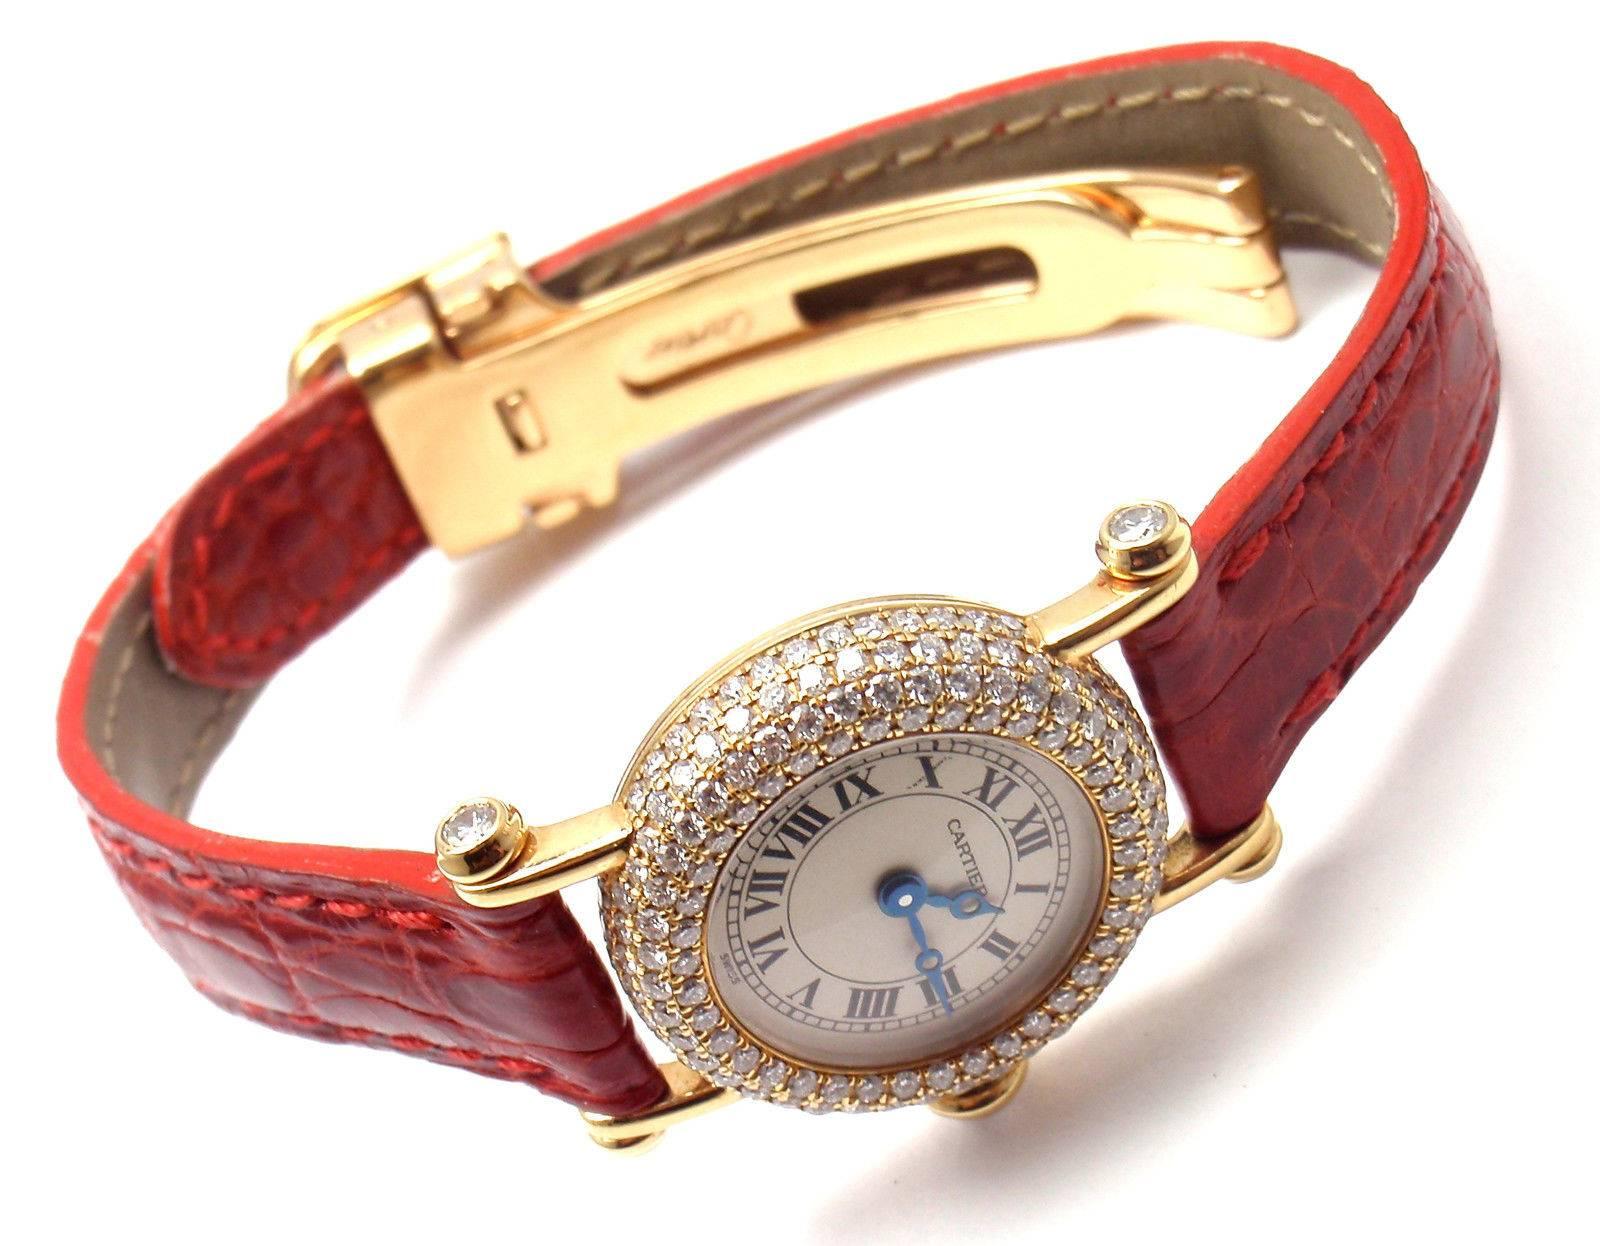 18k Yellow Gold Diamond Diabolo Ladies Wristwatch by Cartier. 
This gorgeous watch comes with original Cartier box.

Brand: Cartier
Style Number: Diabolo
Series: Mini 
Case Material: 18k Yellow Gold with Diamonds
Dial Color: Off white with Roman